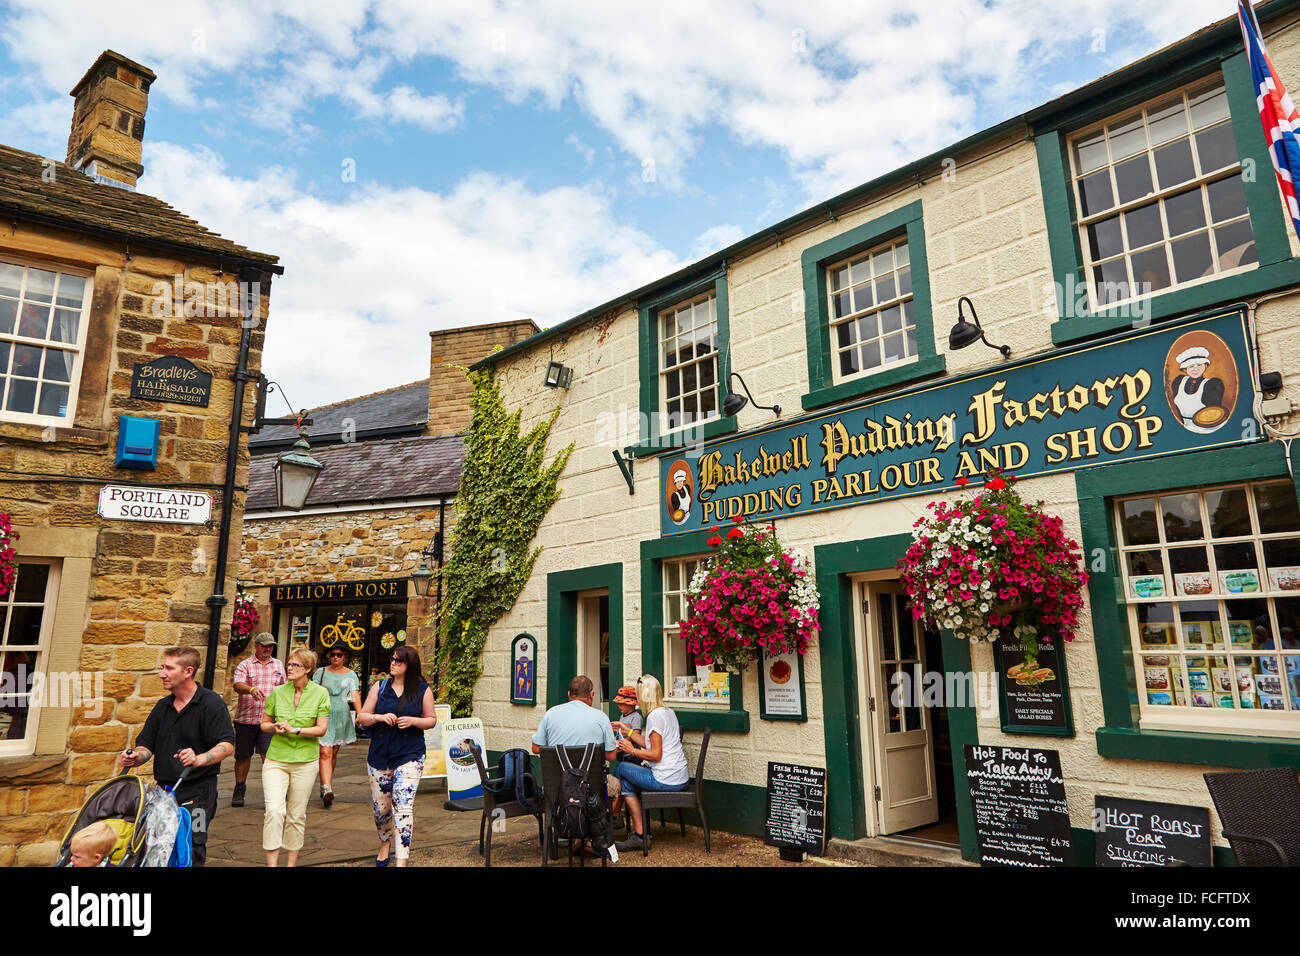 Bakewell pudding shop in Bakewell, Derbyshire, England, UK. Stock Photo